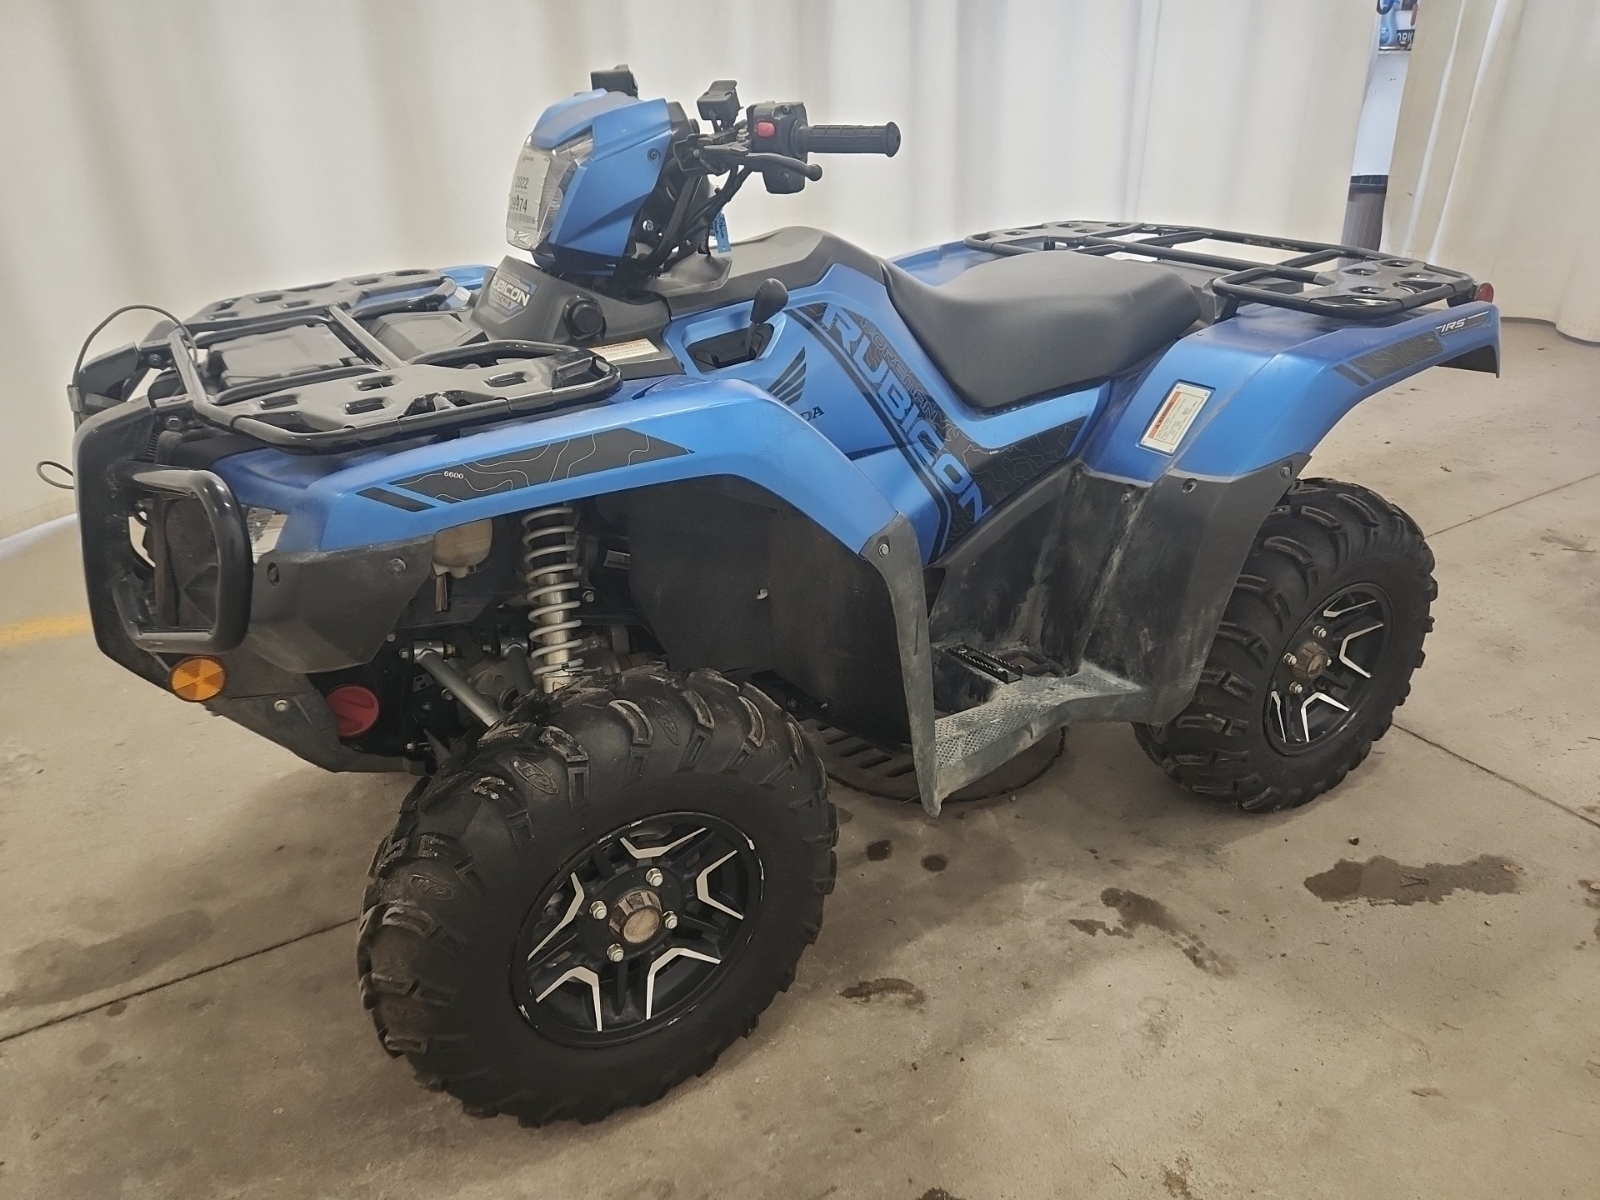 2022 Honda Rubicon Deluxe Financing Available 1-Owner Trades Welcome!